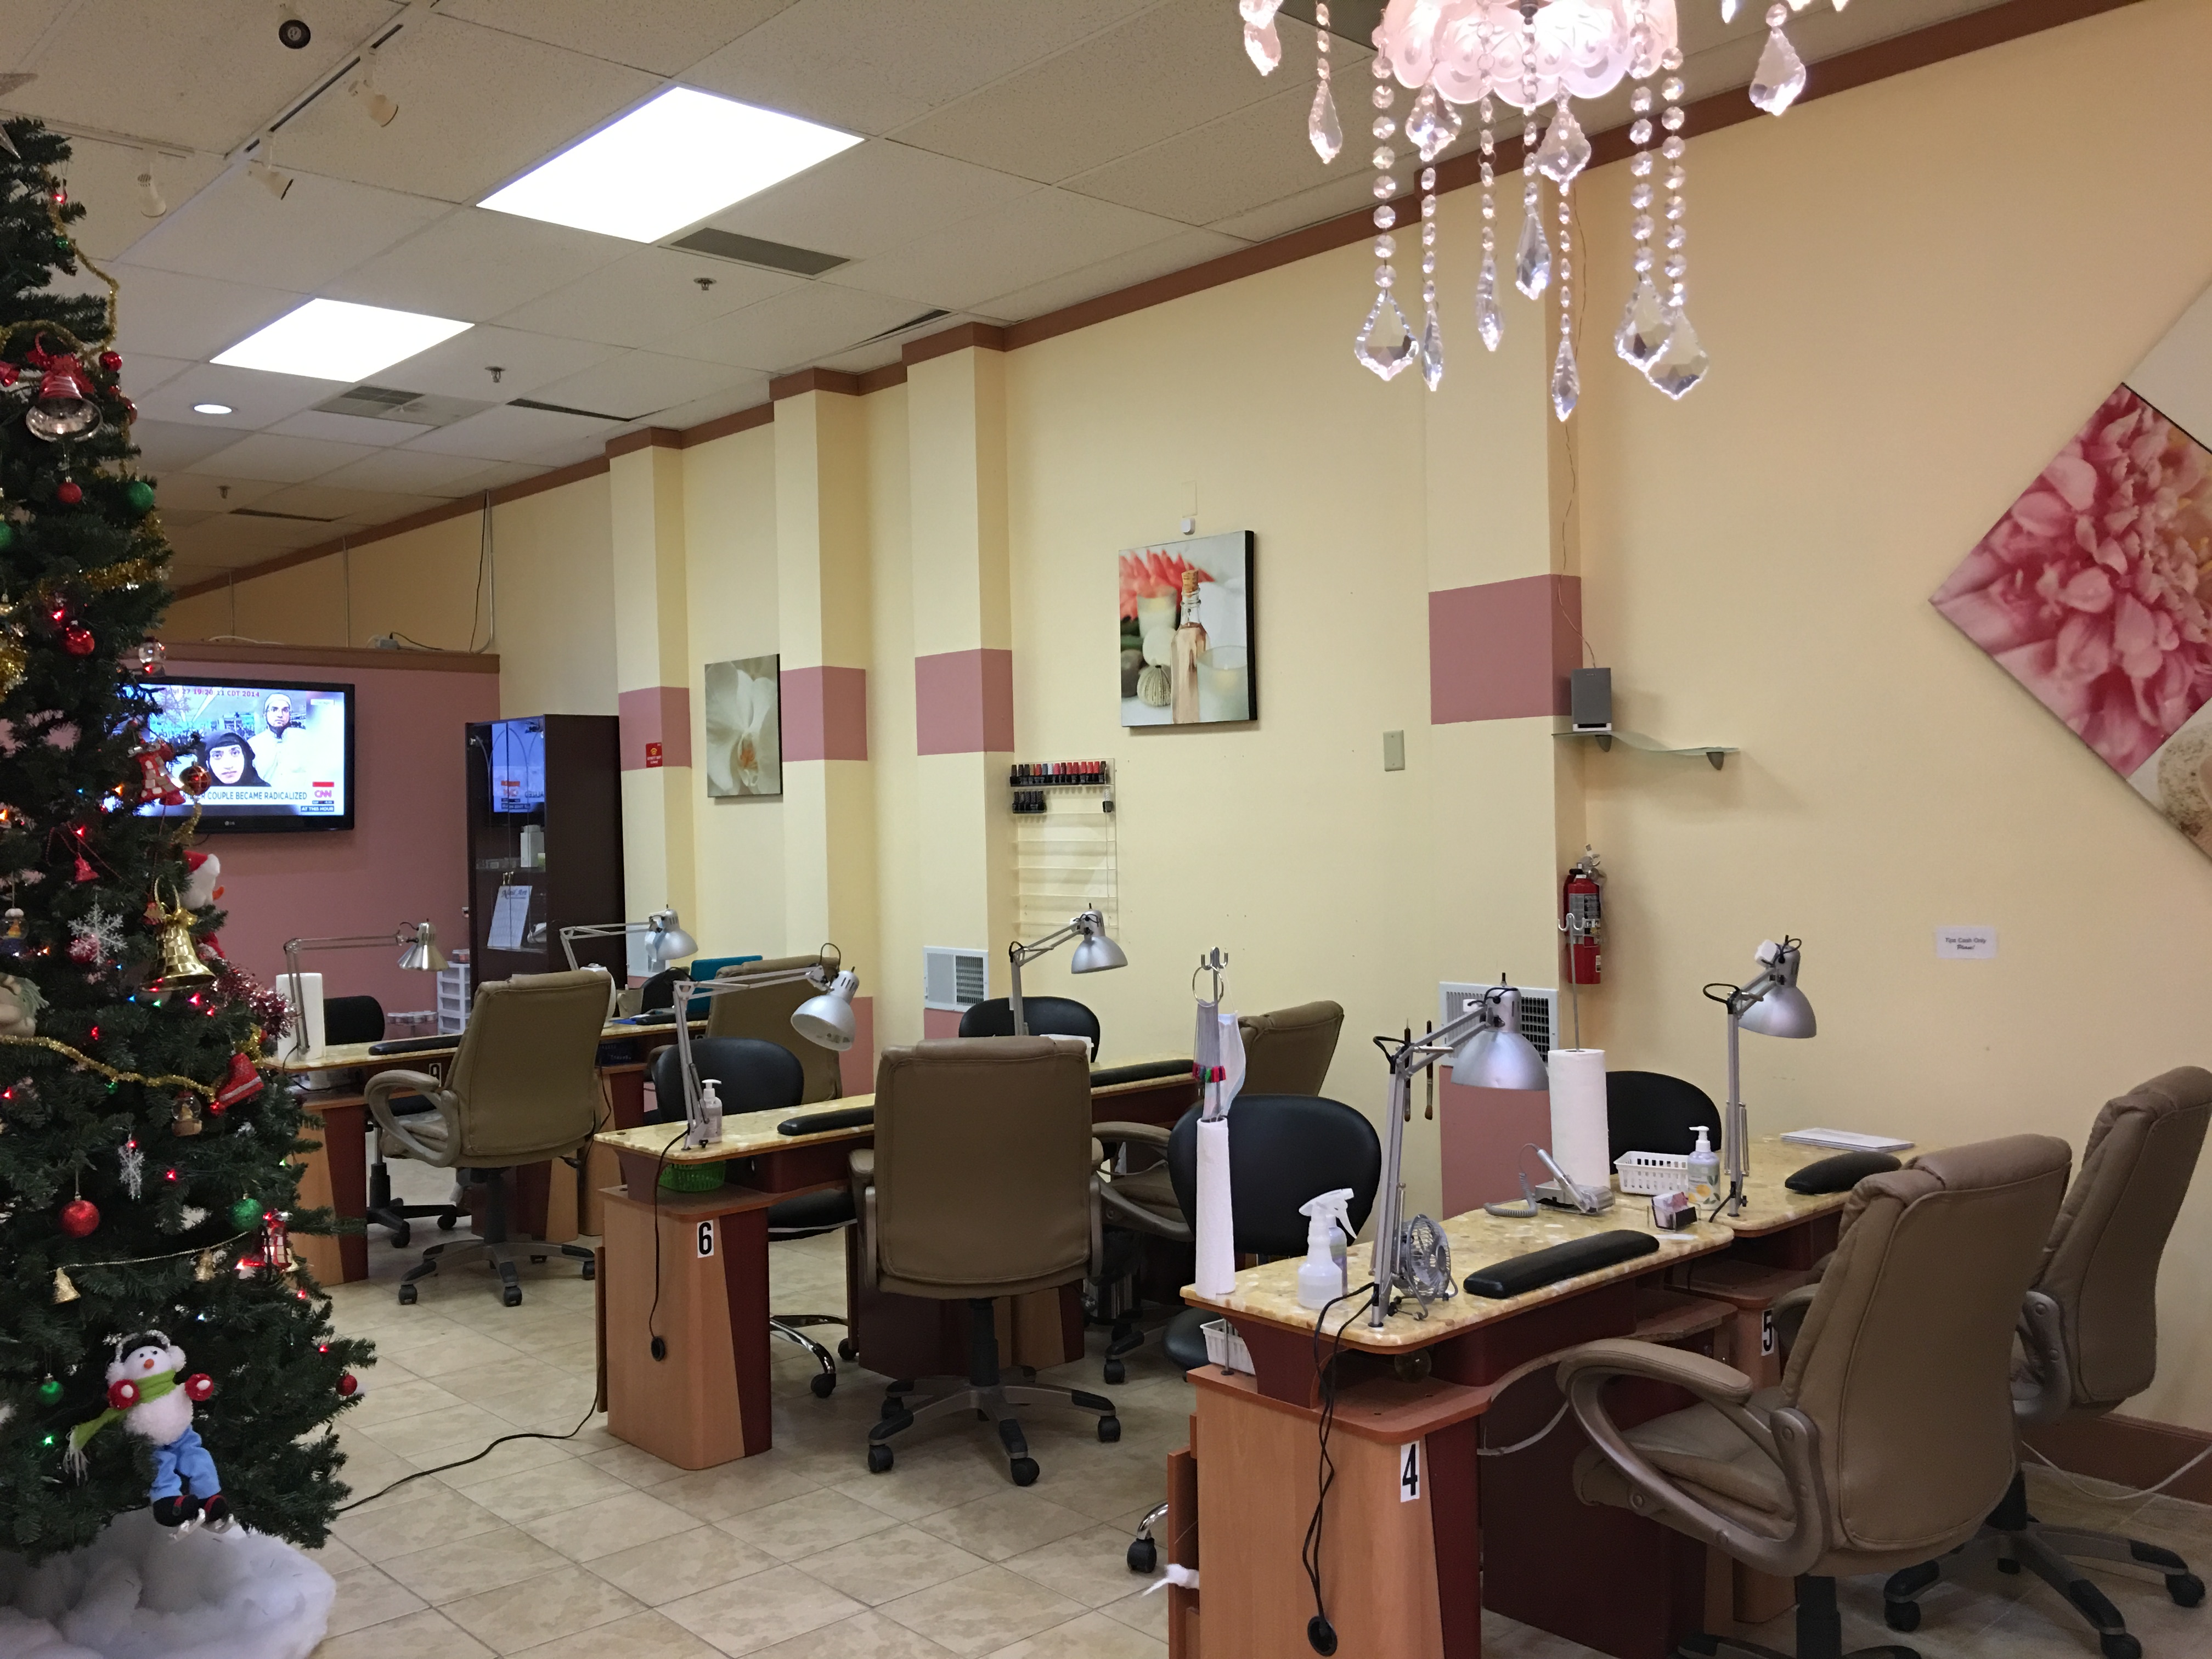 Venetian Nails & Spa Coupons near me in State College ...